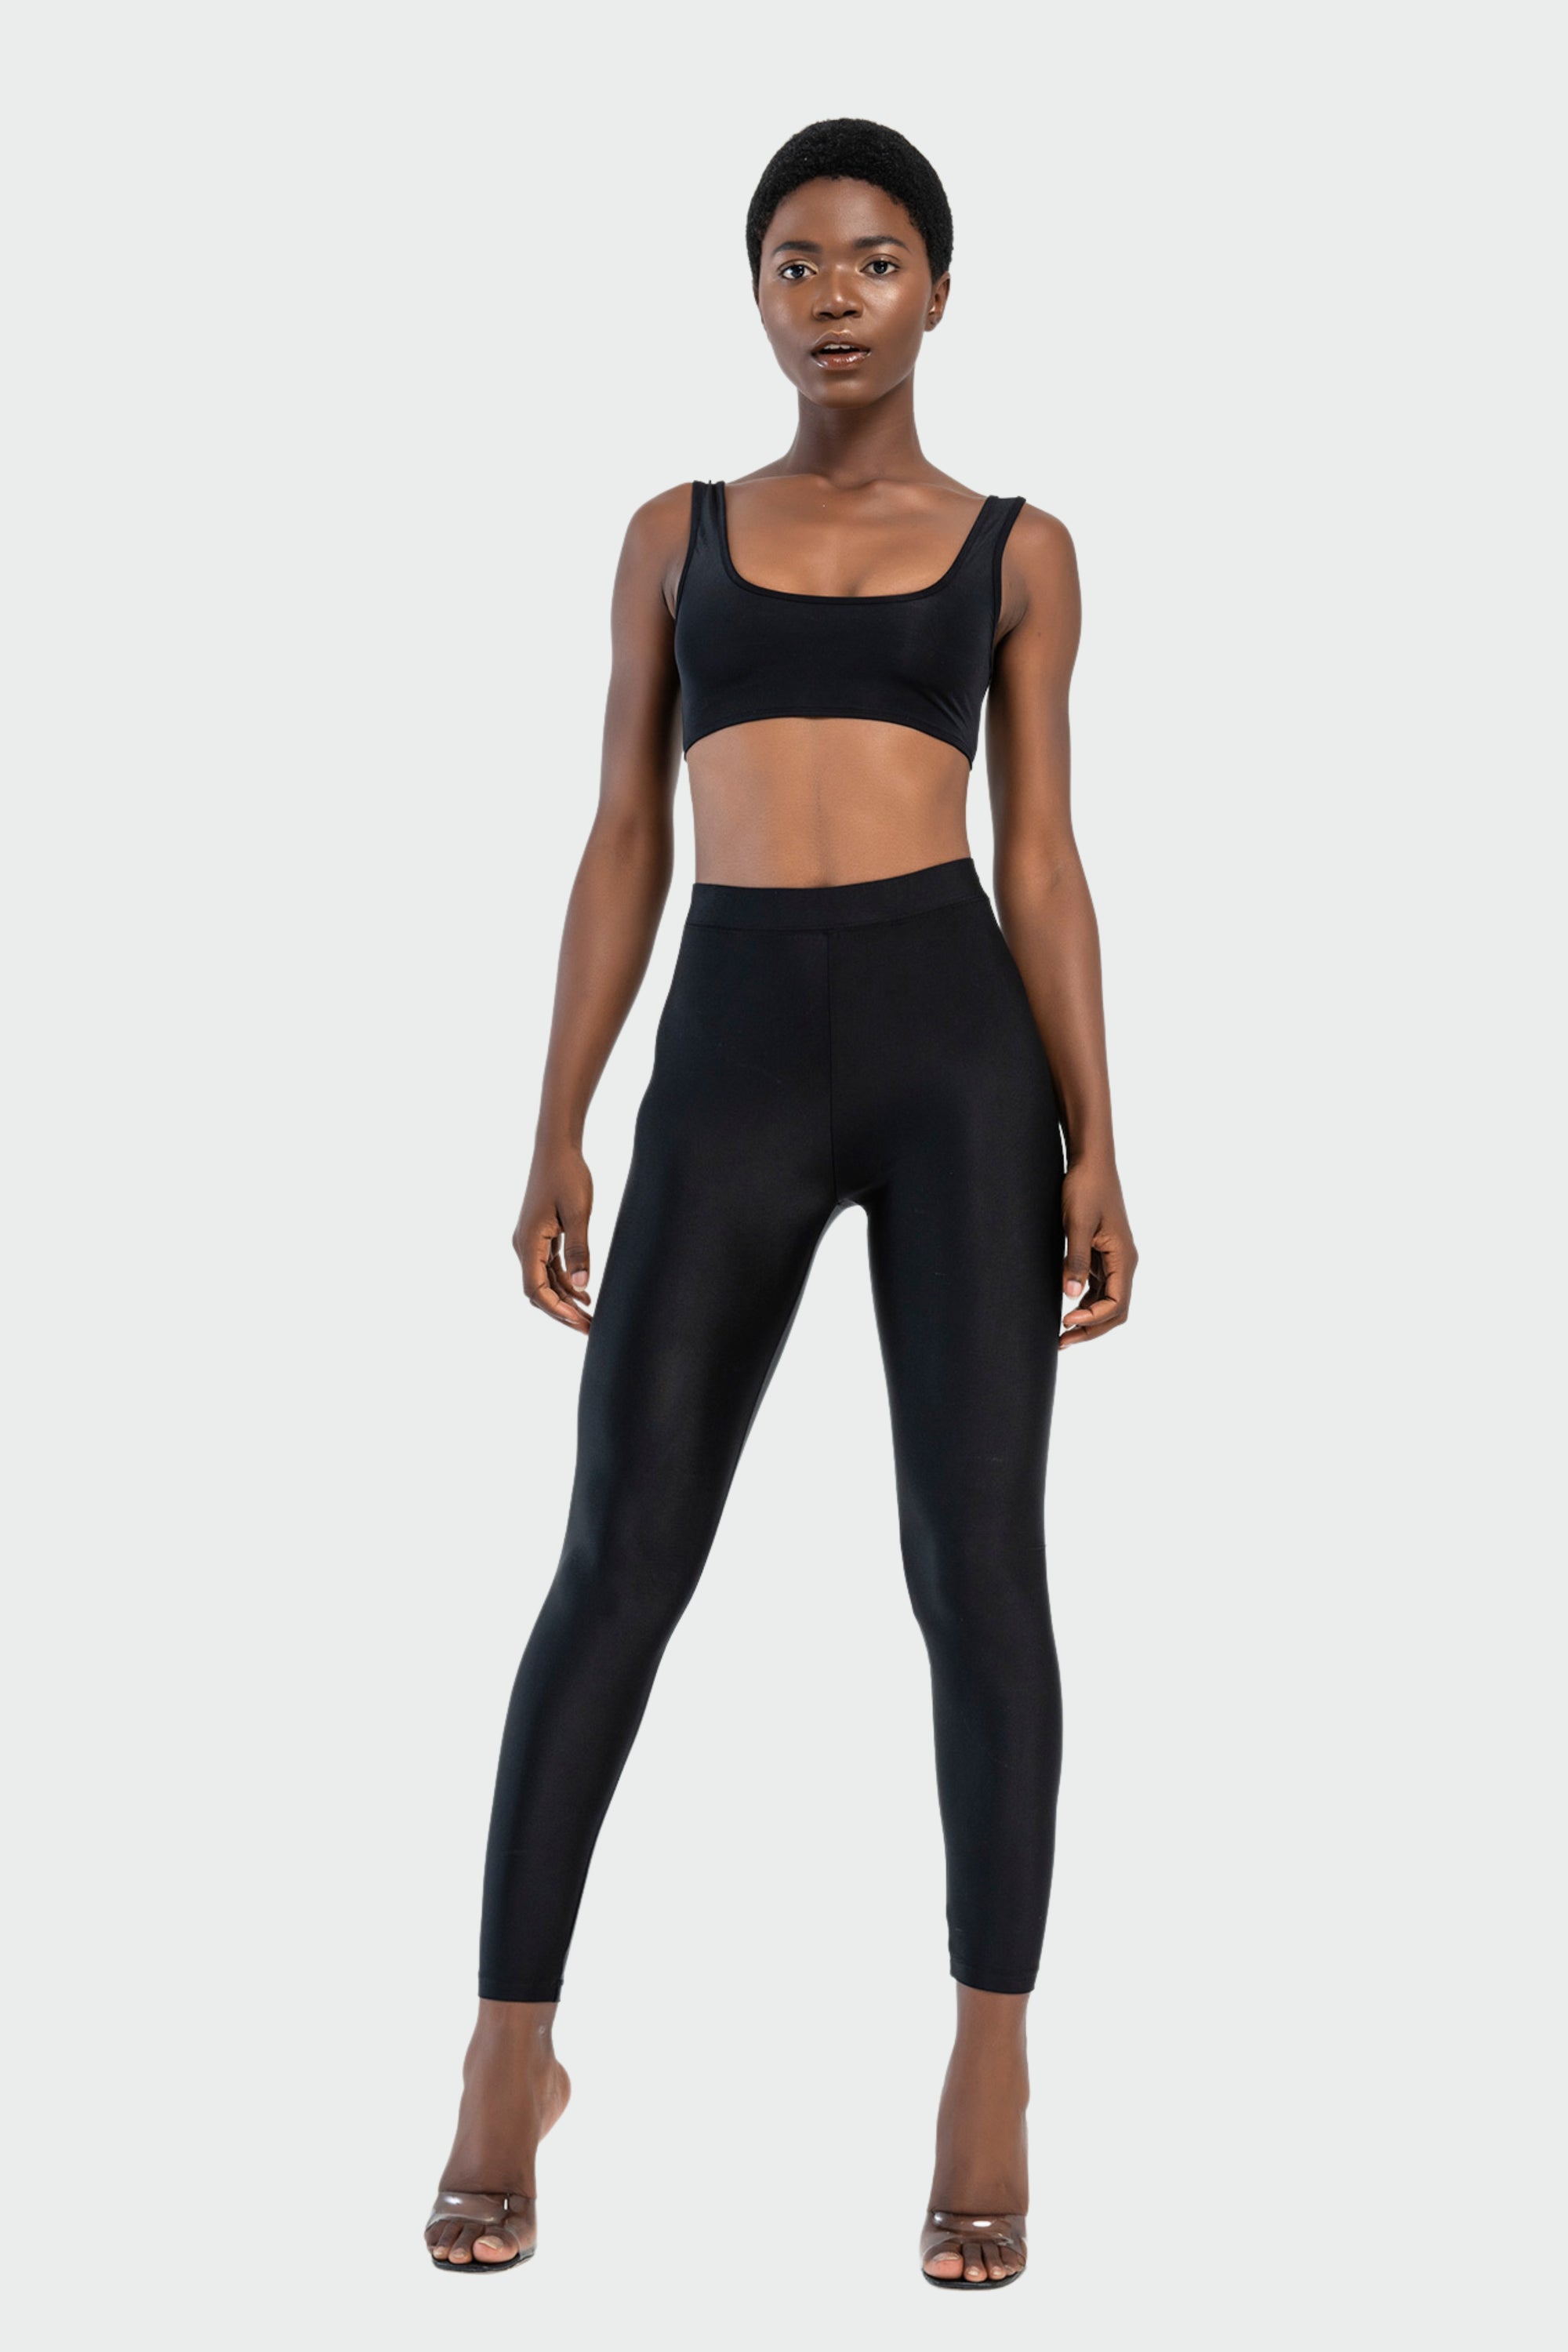 7 Faux-Leather Leggings That Rival Spanx — And Are Half the Price | Us  Weekly